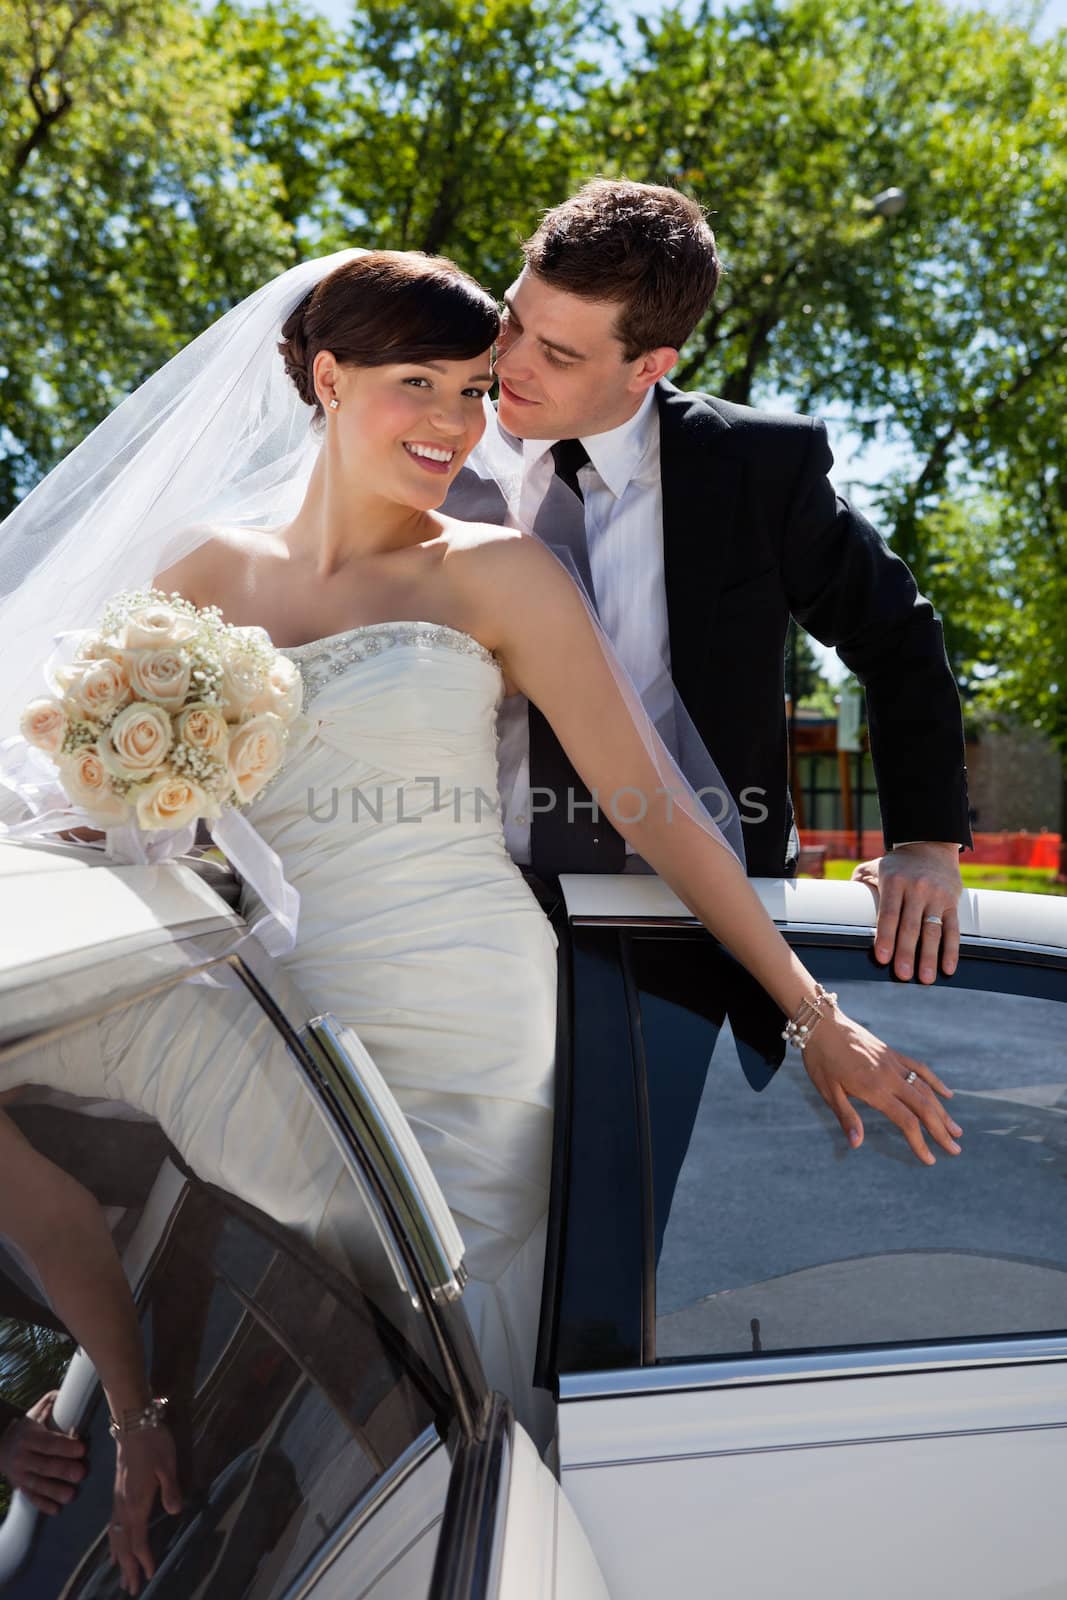 Wedding couple in Limo, groom about to kiss bride